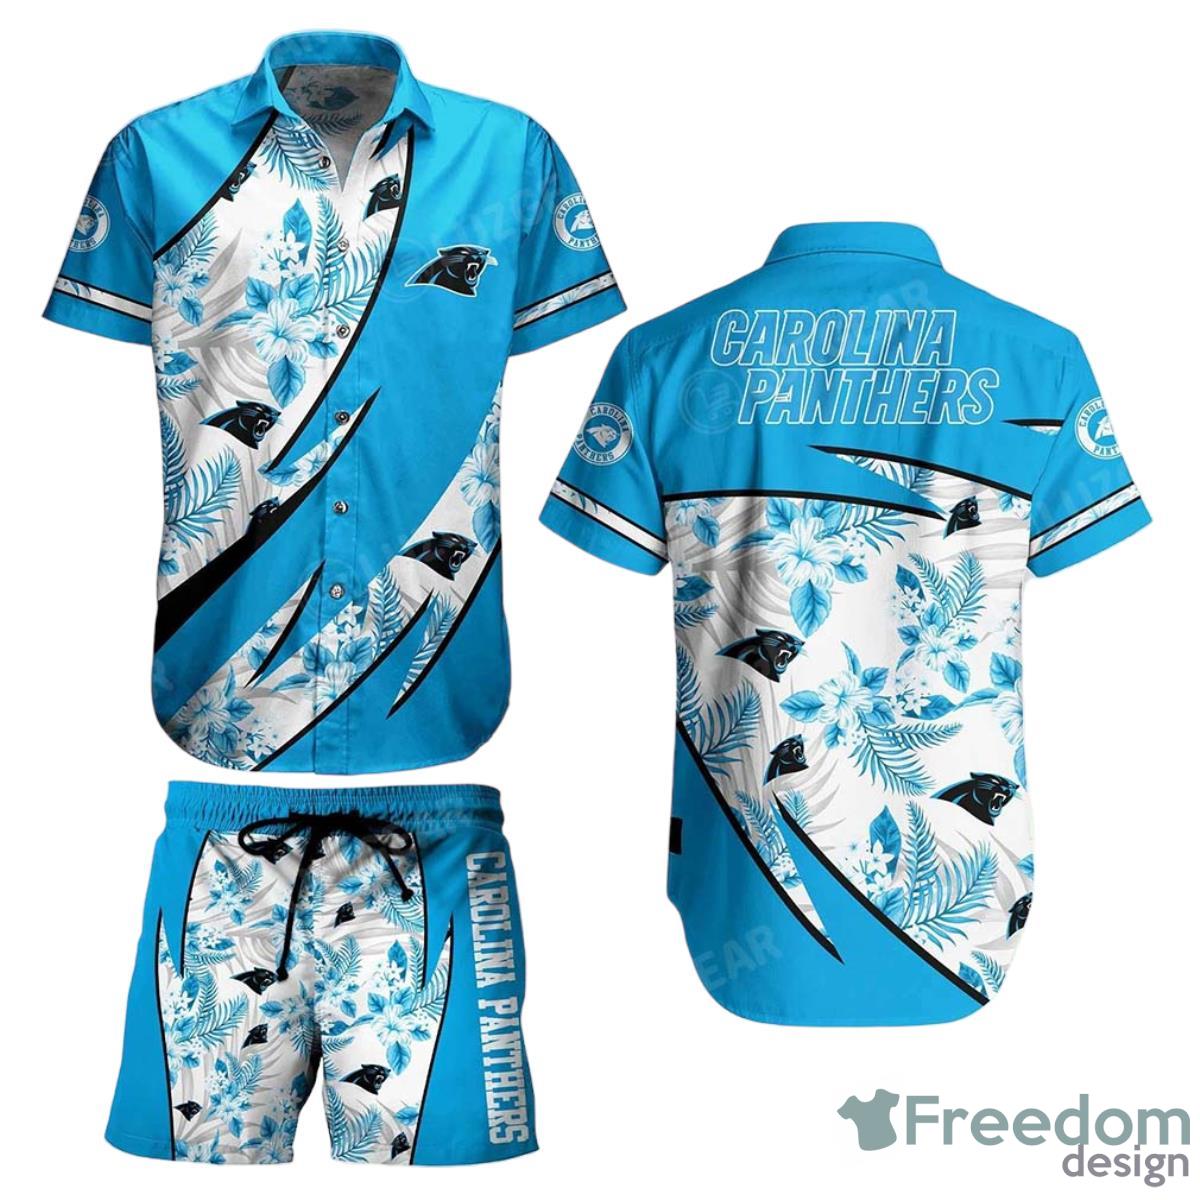 Carolina Panthers NFL Hawaiian Shirt And Short Style Tropical Graphic Summer For Awesome Fans Product Photo 1